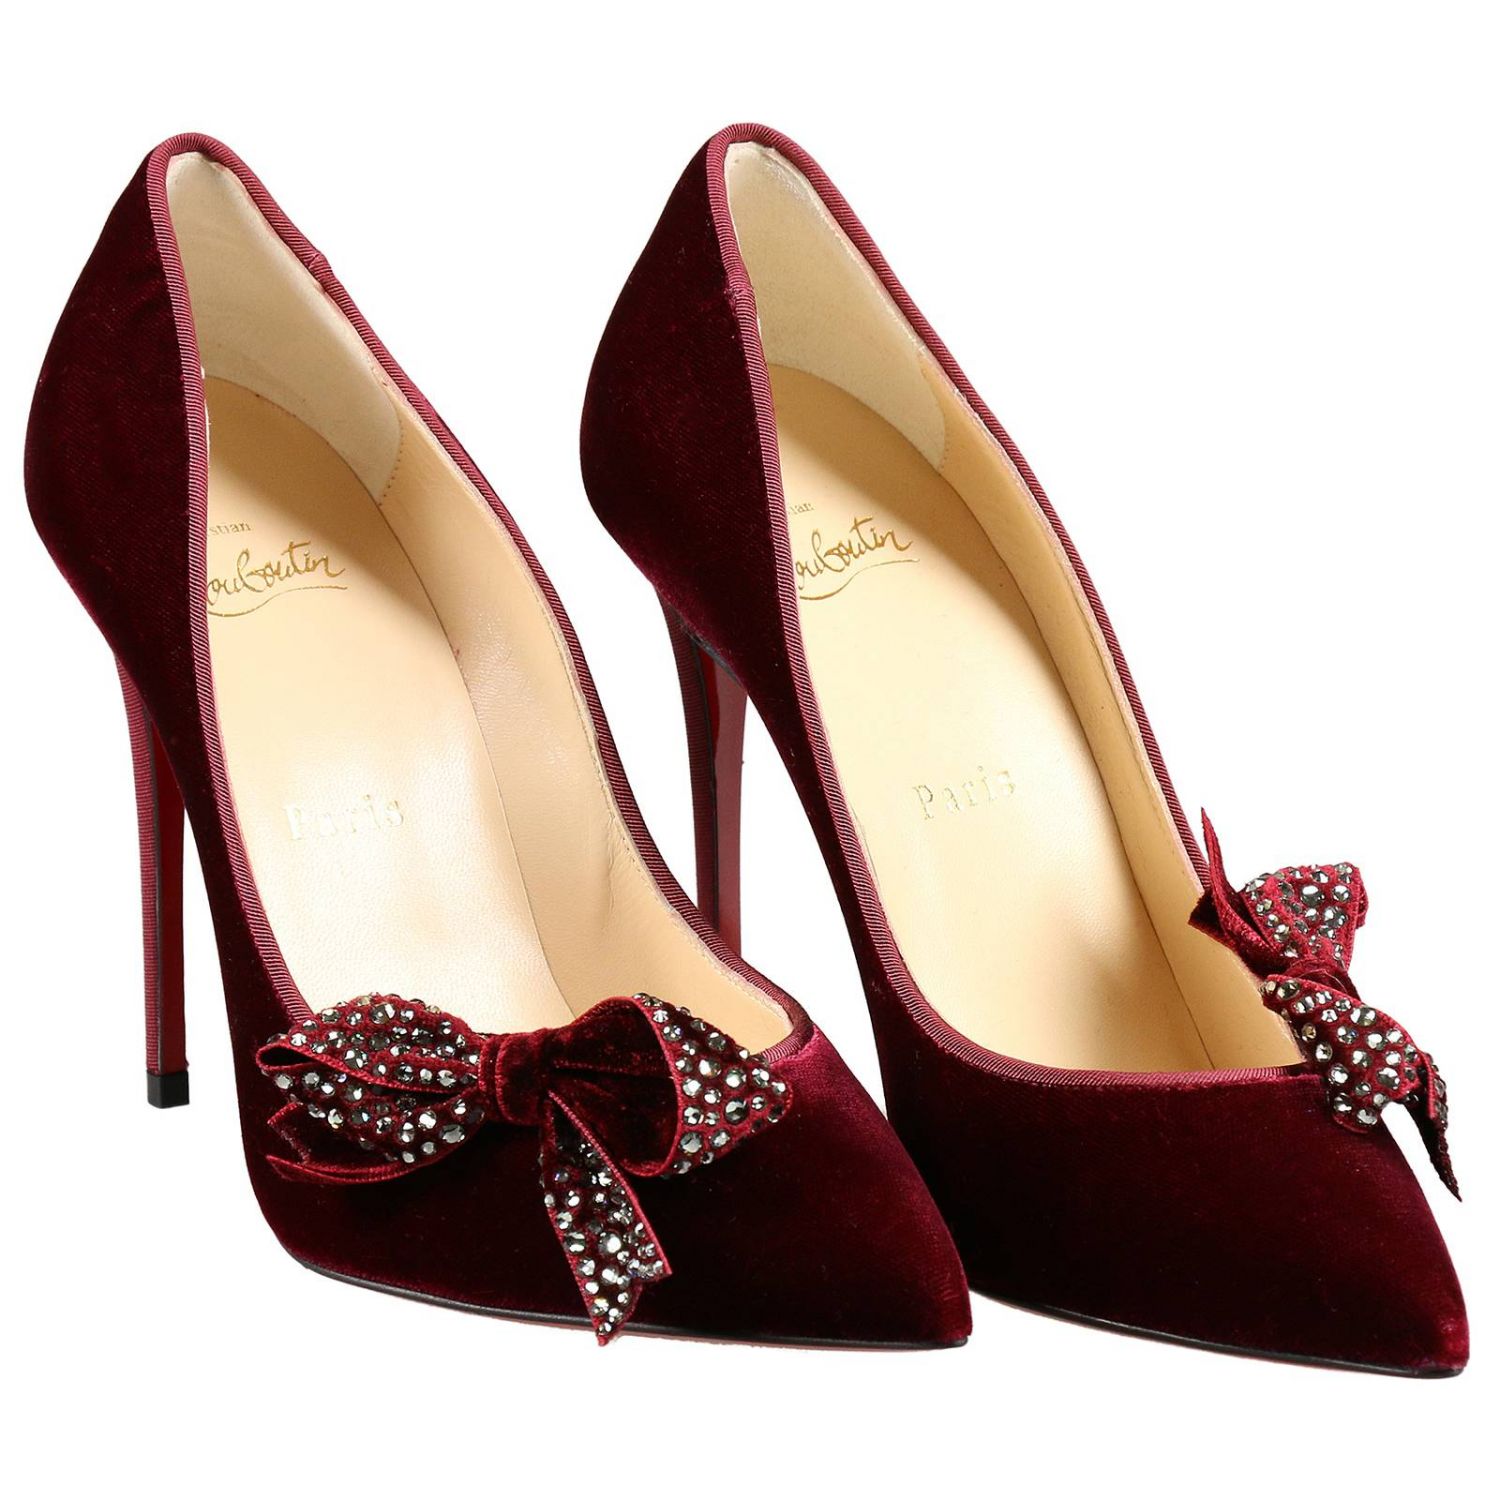 Chaussures Femme Christian Louboutin